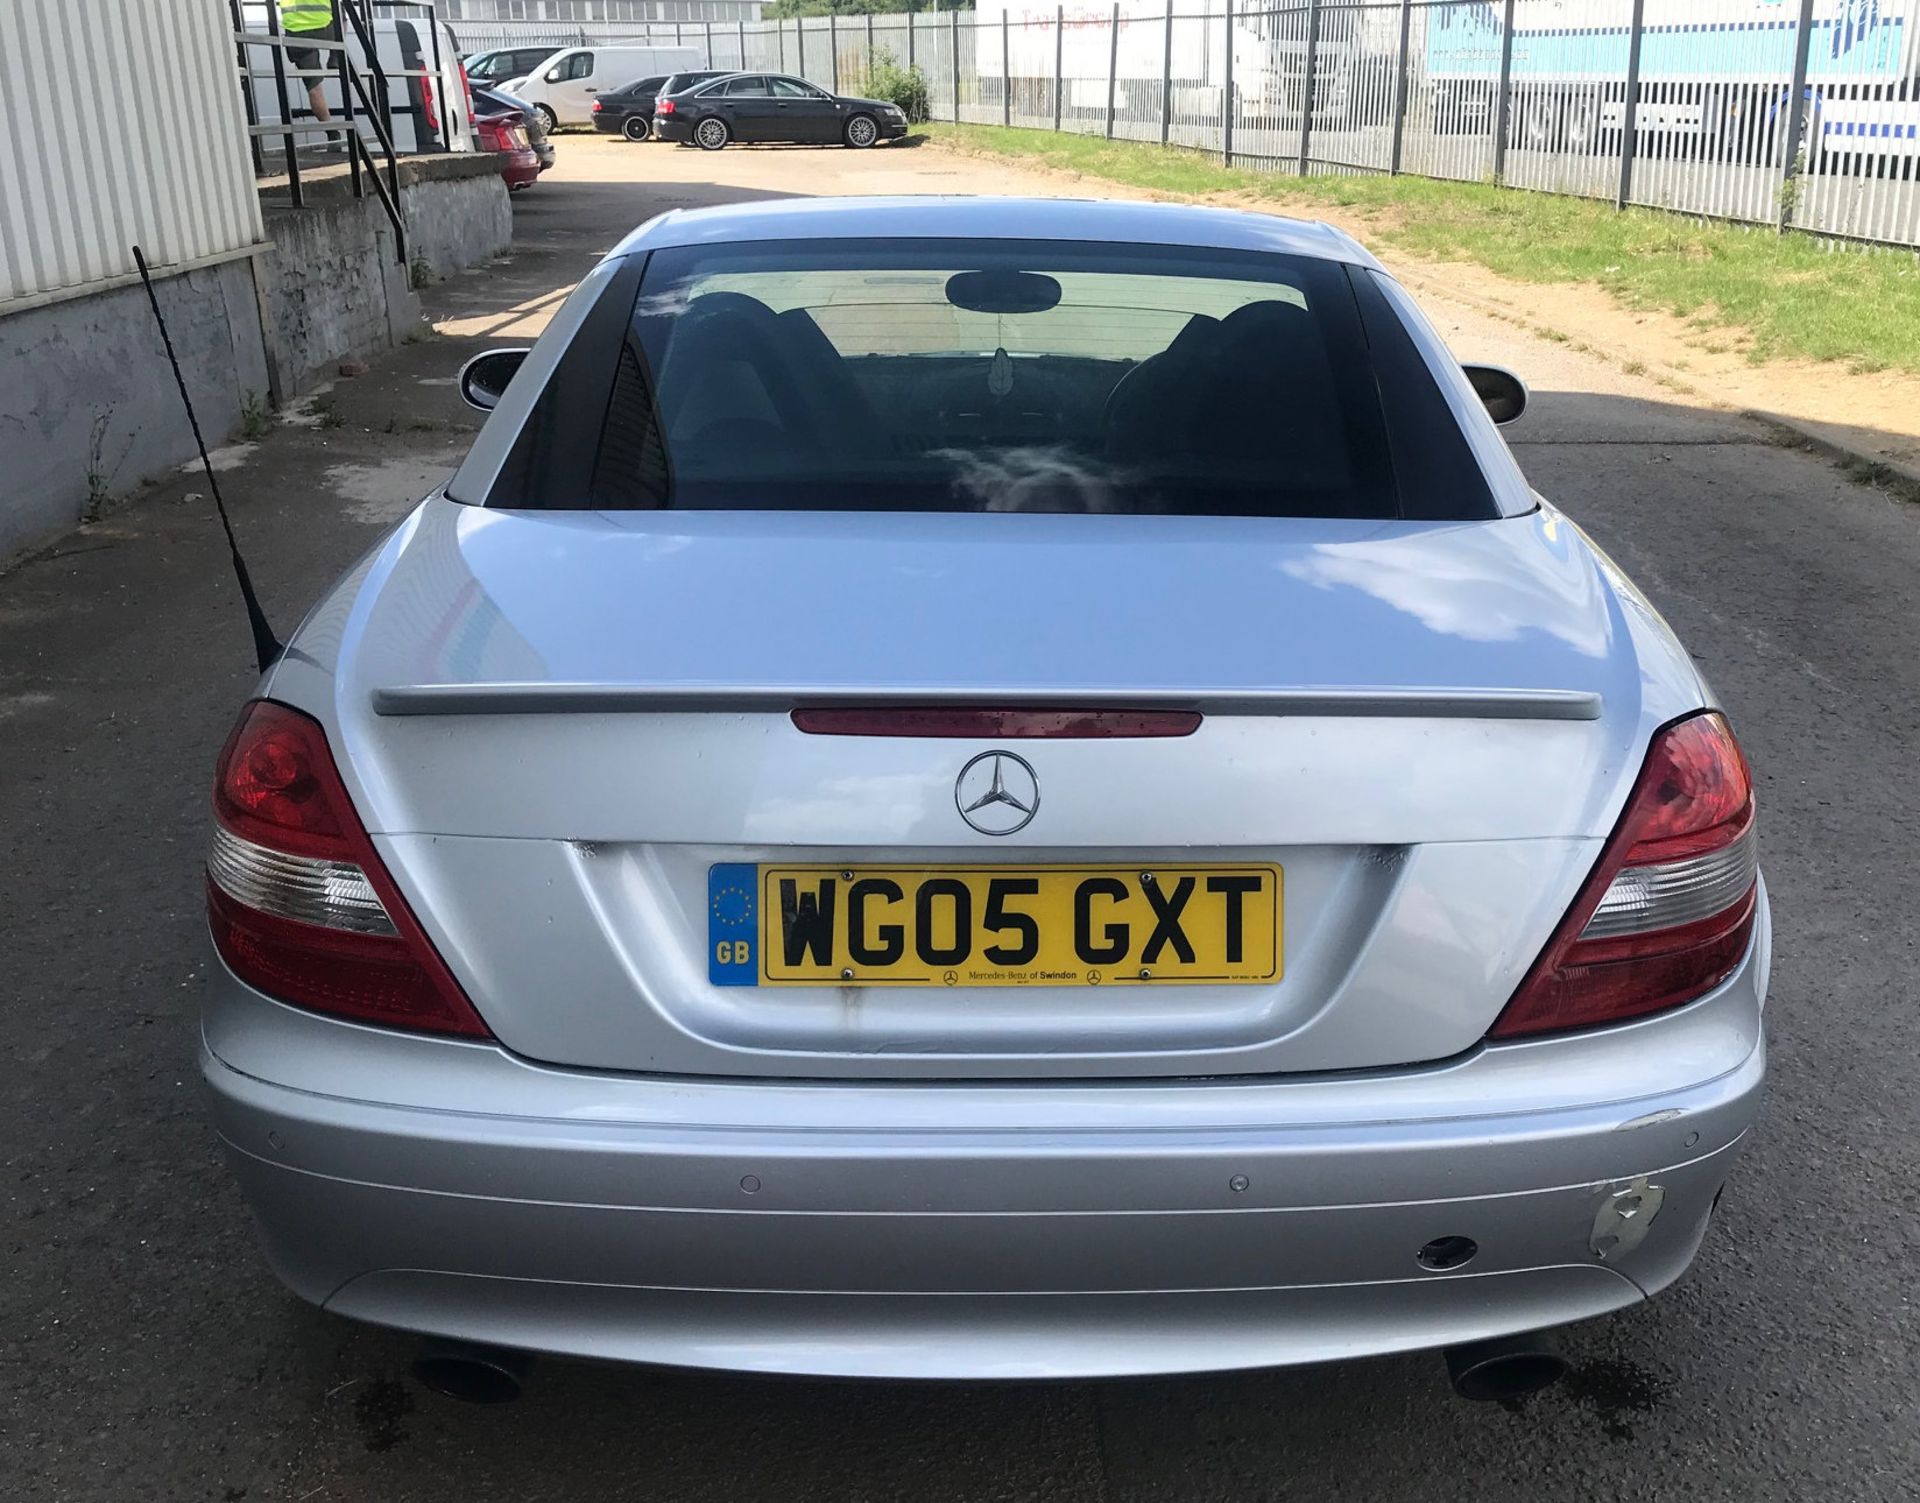 2005 Mercedes SLK 350 2 Dr Convertible - CL505 - NO VAT ON THE HAMMER - Location: Corby, N - Image 6 of 11